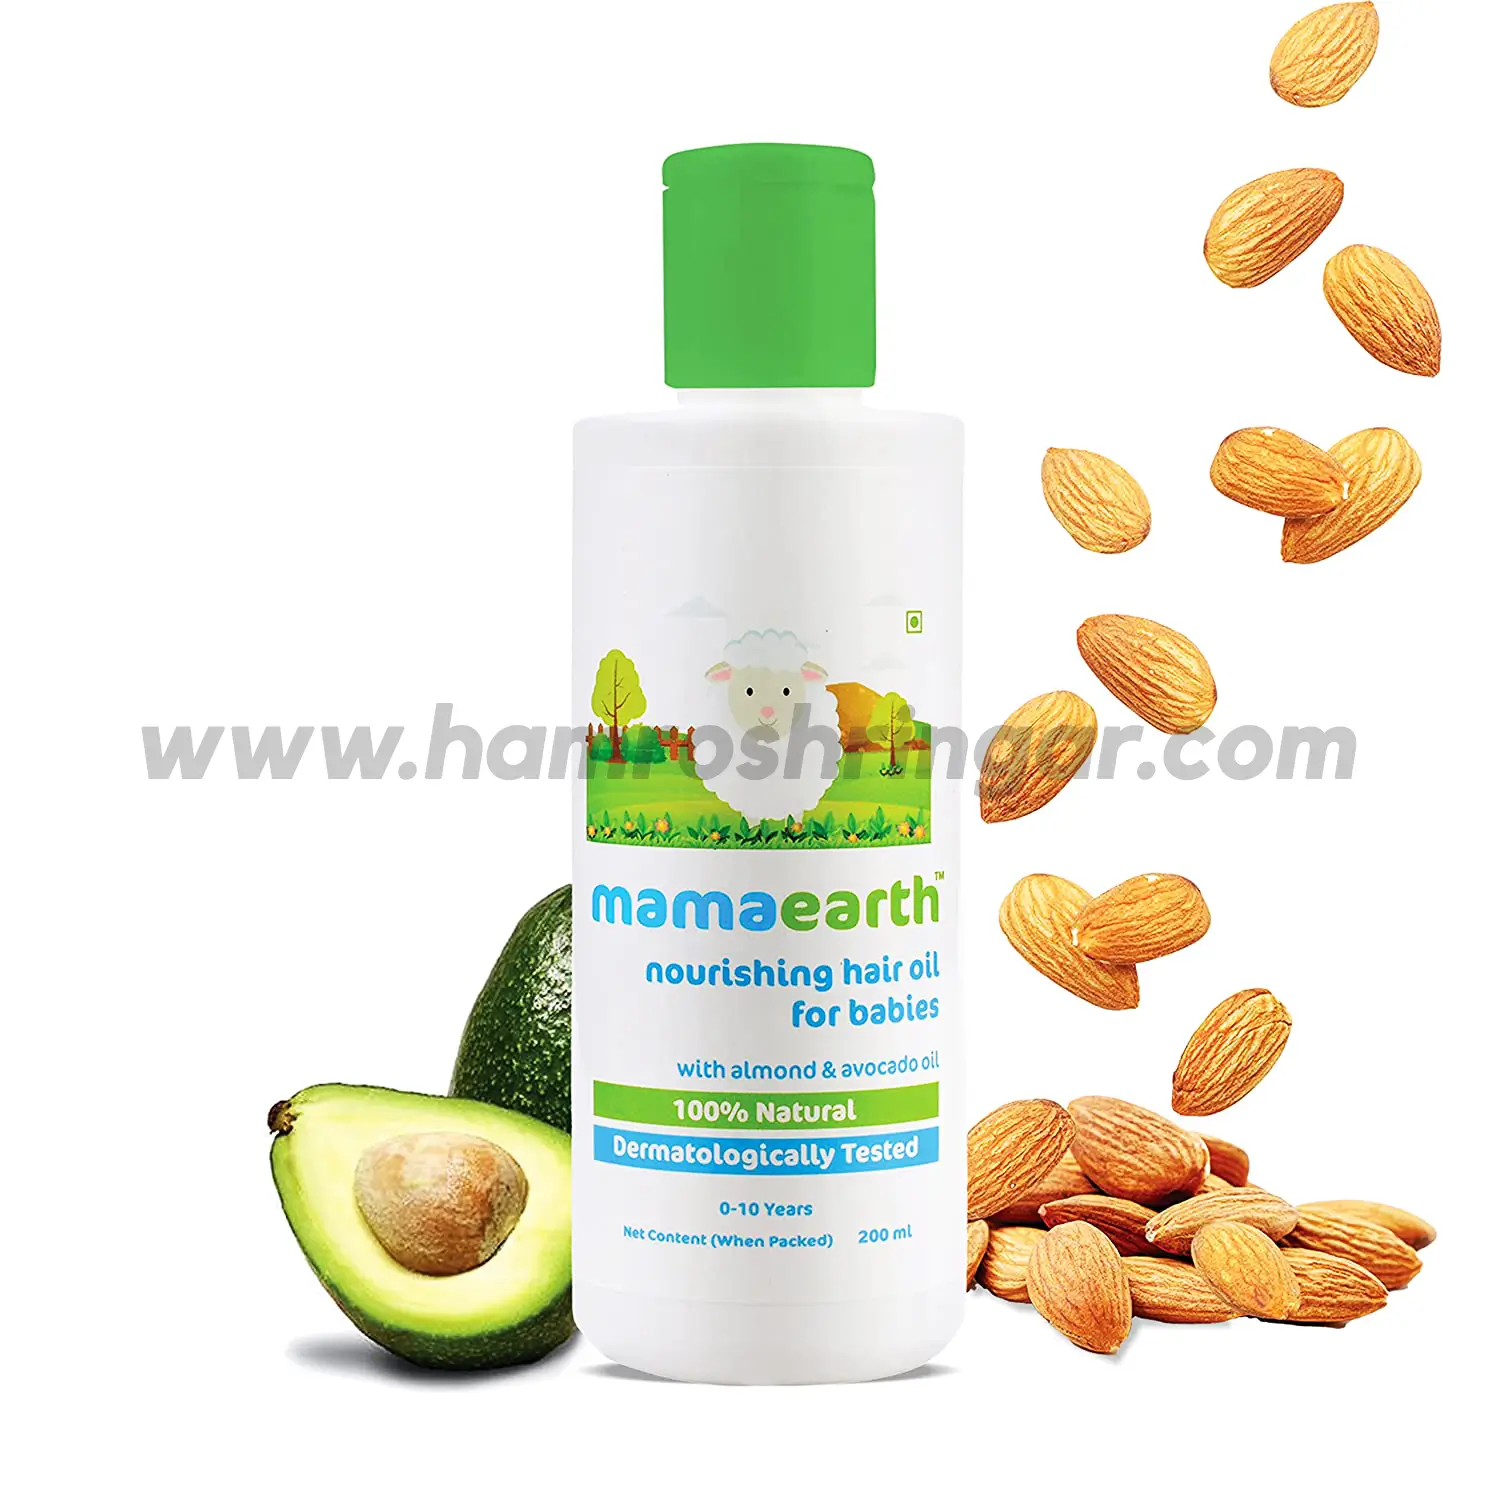 Mamaearth | Nourishing Hair Oil for Babies with Almond & Avocado Oil - 200  ml - Online Shopping in Nepal | Shringar Store | Shringar Shop | Cosmetics  Store | Cosmetics Shop | Online Store in Nepal